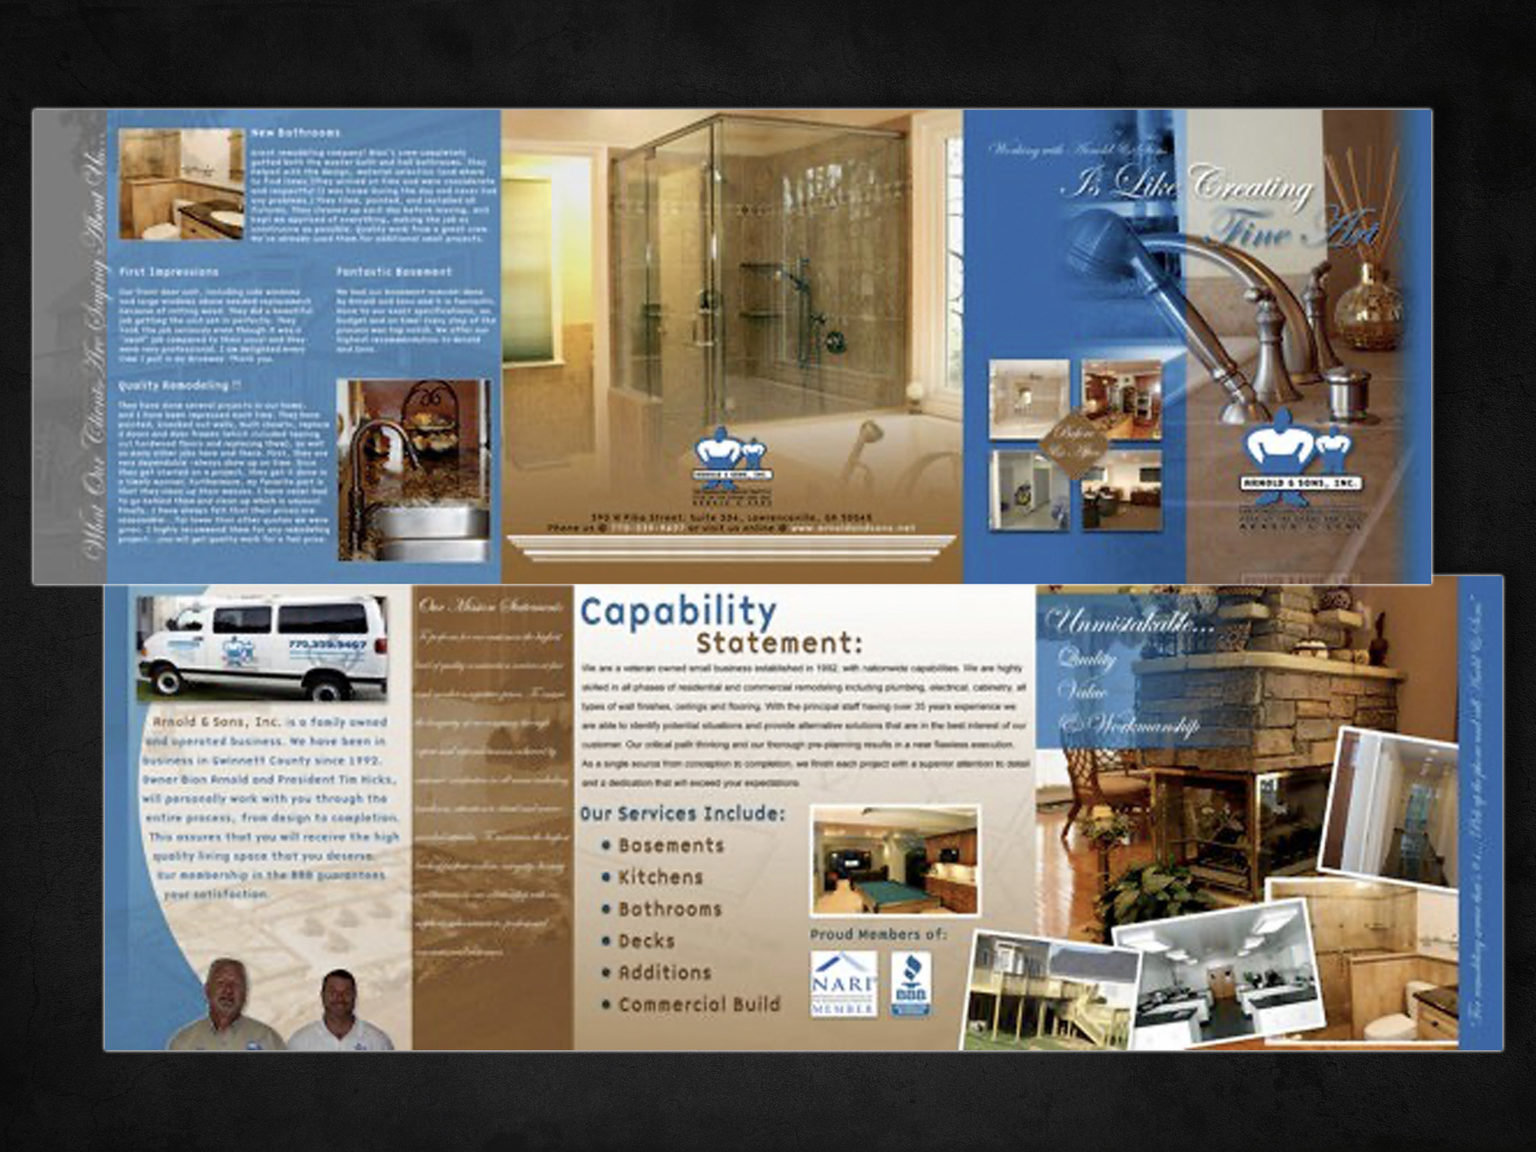 Arnold & Sons - Brand Identity & Marketing Brochure • Designed by: Designs In Motion, Inc.